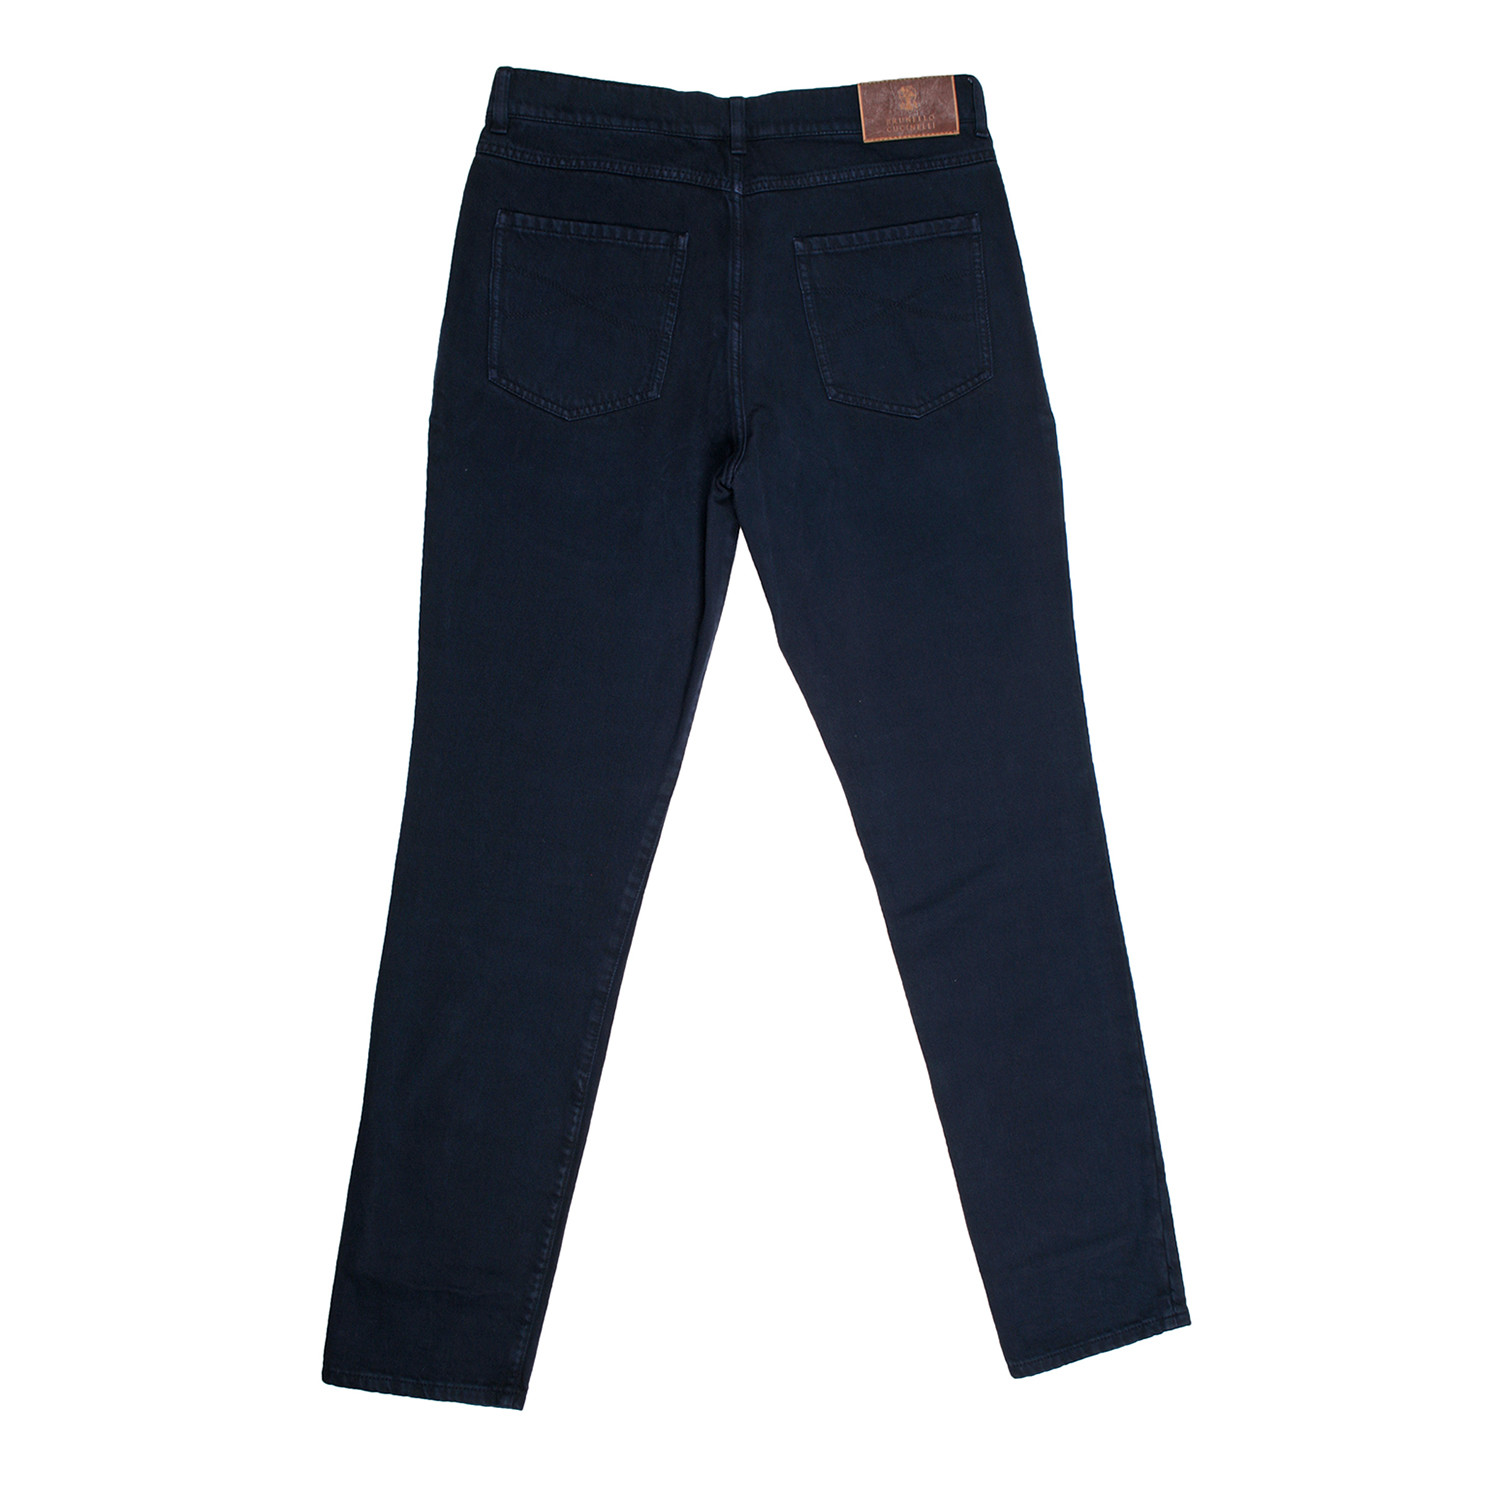 Buddy Pants // Navy Blue (30WX32L) - Brunello Cucinelli - Touch of Modern